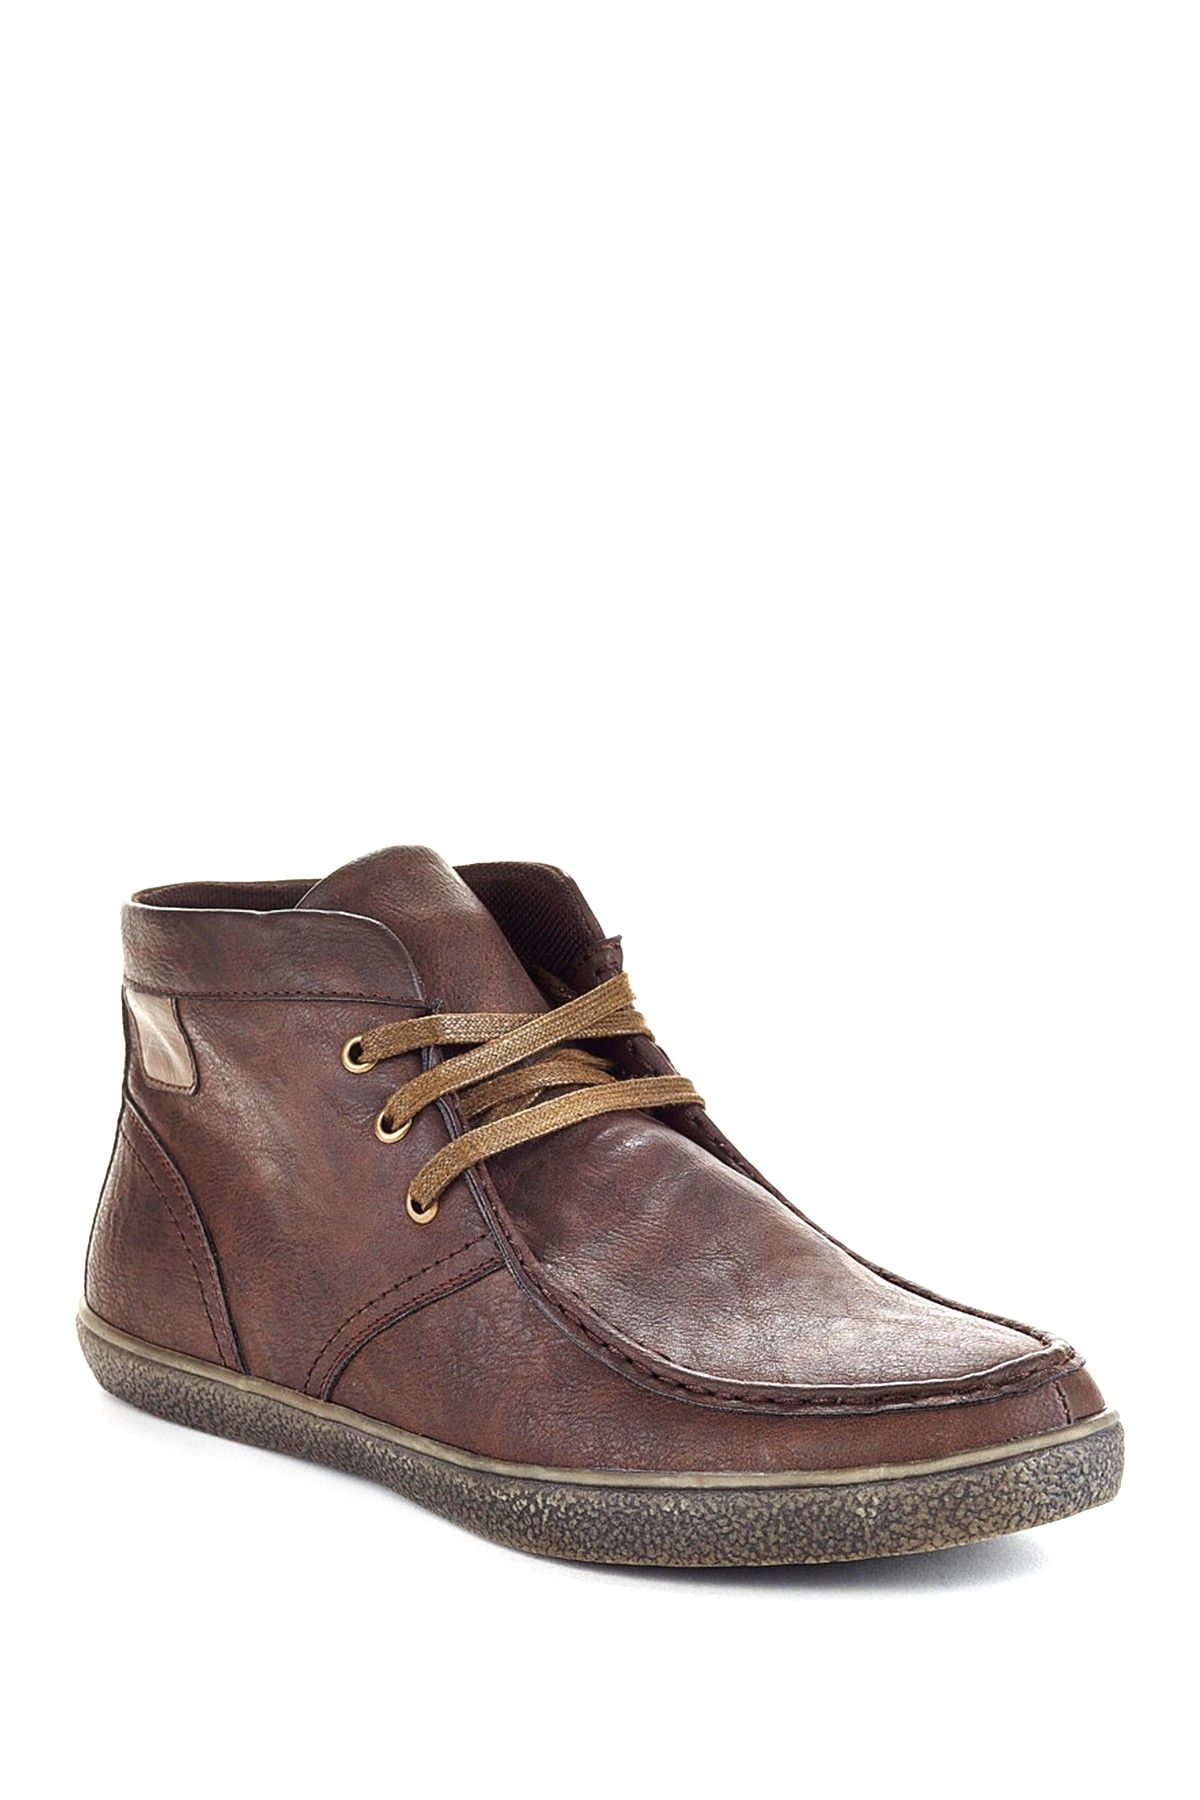 eddie marc lace up chukka boot chukka bootnordstrom racklace up